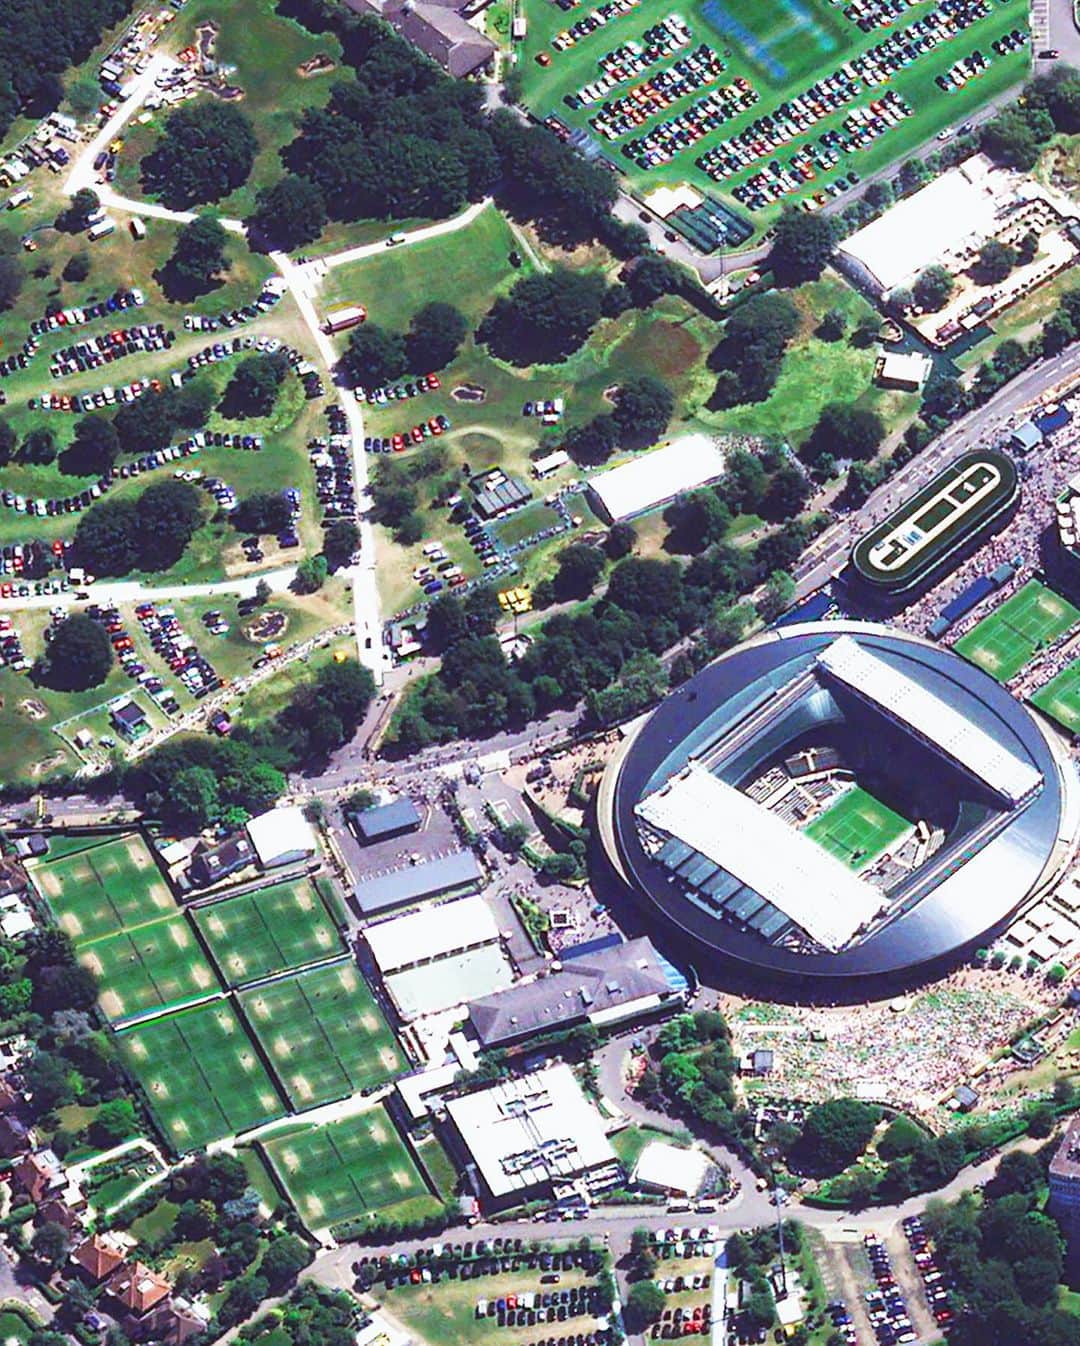 Daily Overviewのインスタグラム：「Wimbledon, the oldest tennis tournament in the world, wrapped up its 136th edition this weekend. The All England Lawn Tennis Club hosts the event on 18 grass courts, the largest of which is Centre Court, accommodating 15,000 spectators. The women’s and men’s singles events this year were won by Markéta Vondroušová and Carlos Alcaraz, respectively.   Created by @benjaminrgrant  Source imagery: @airbus_space」